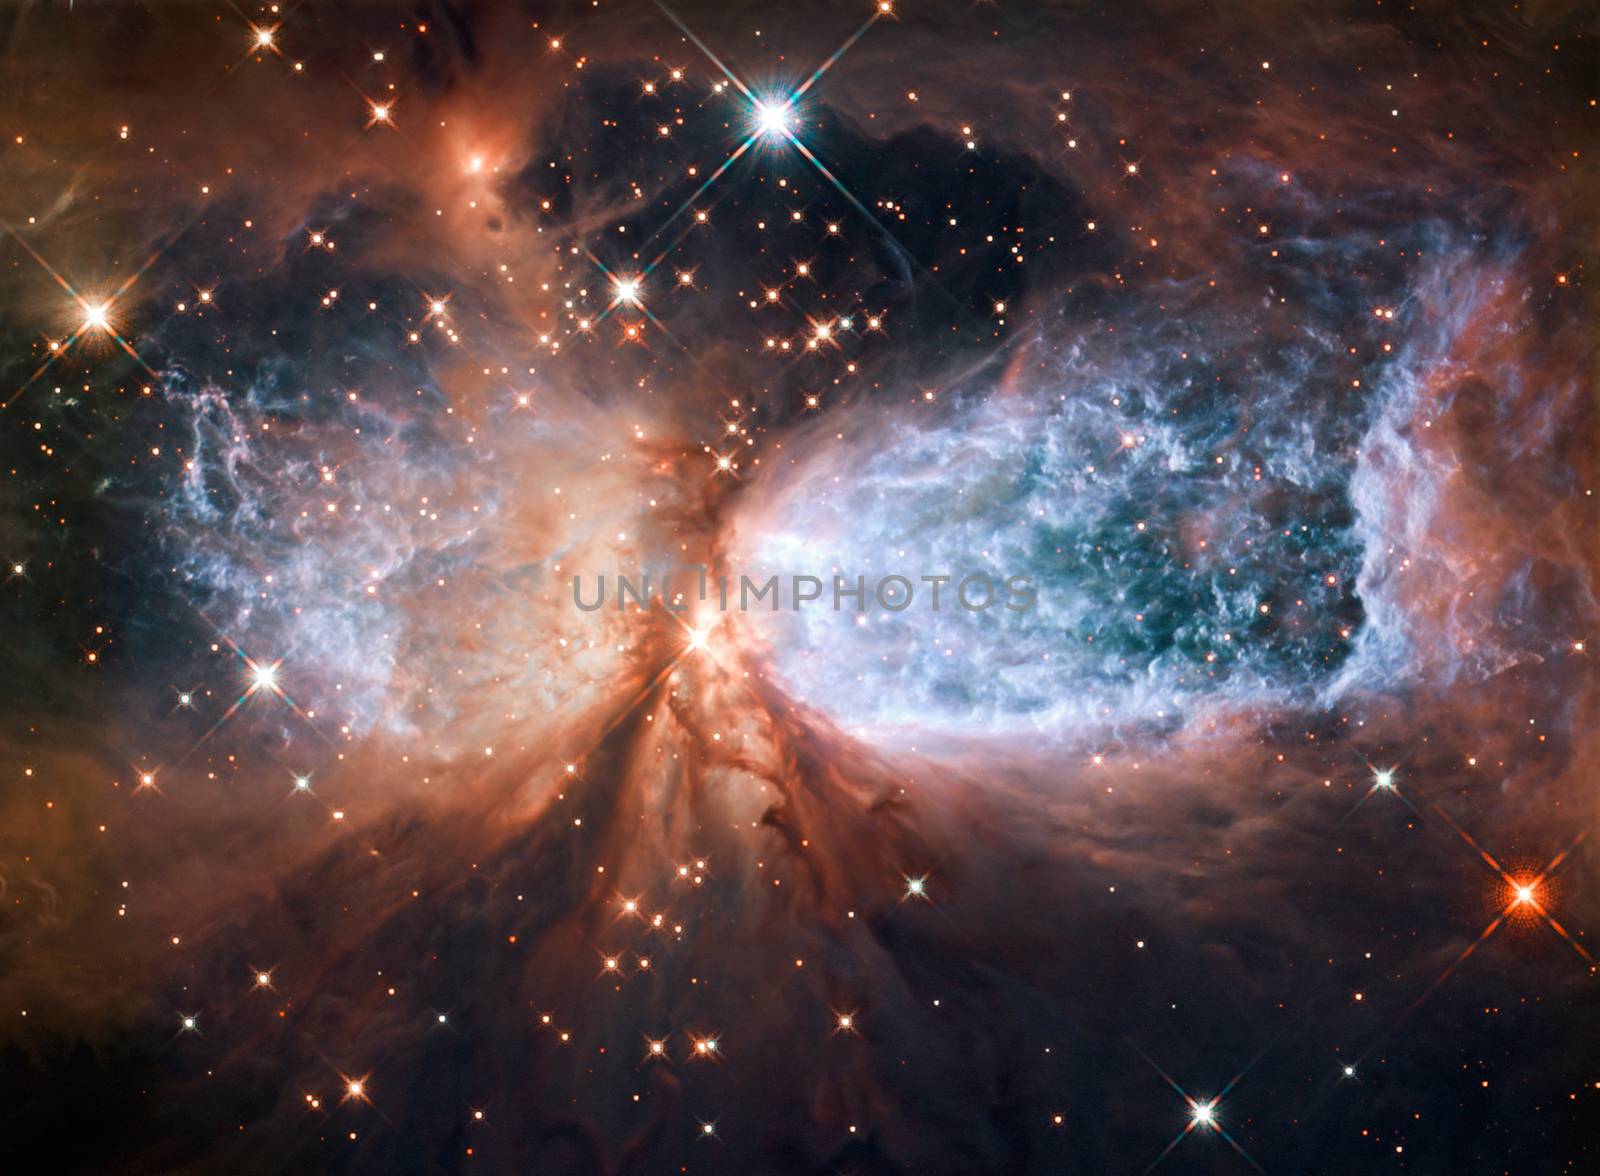 Hubble View by applesstock